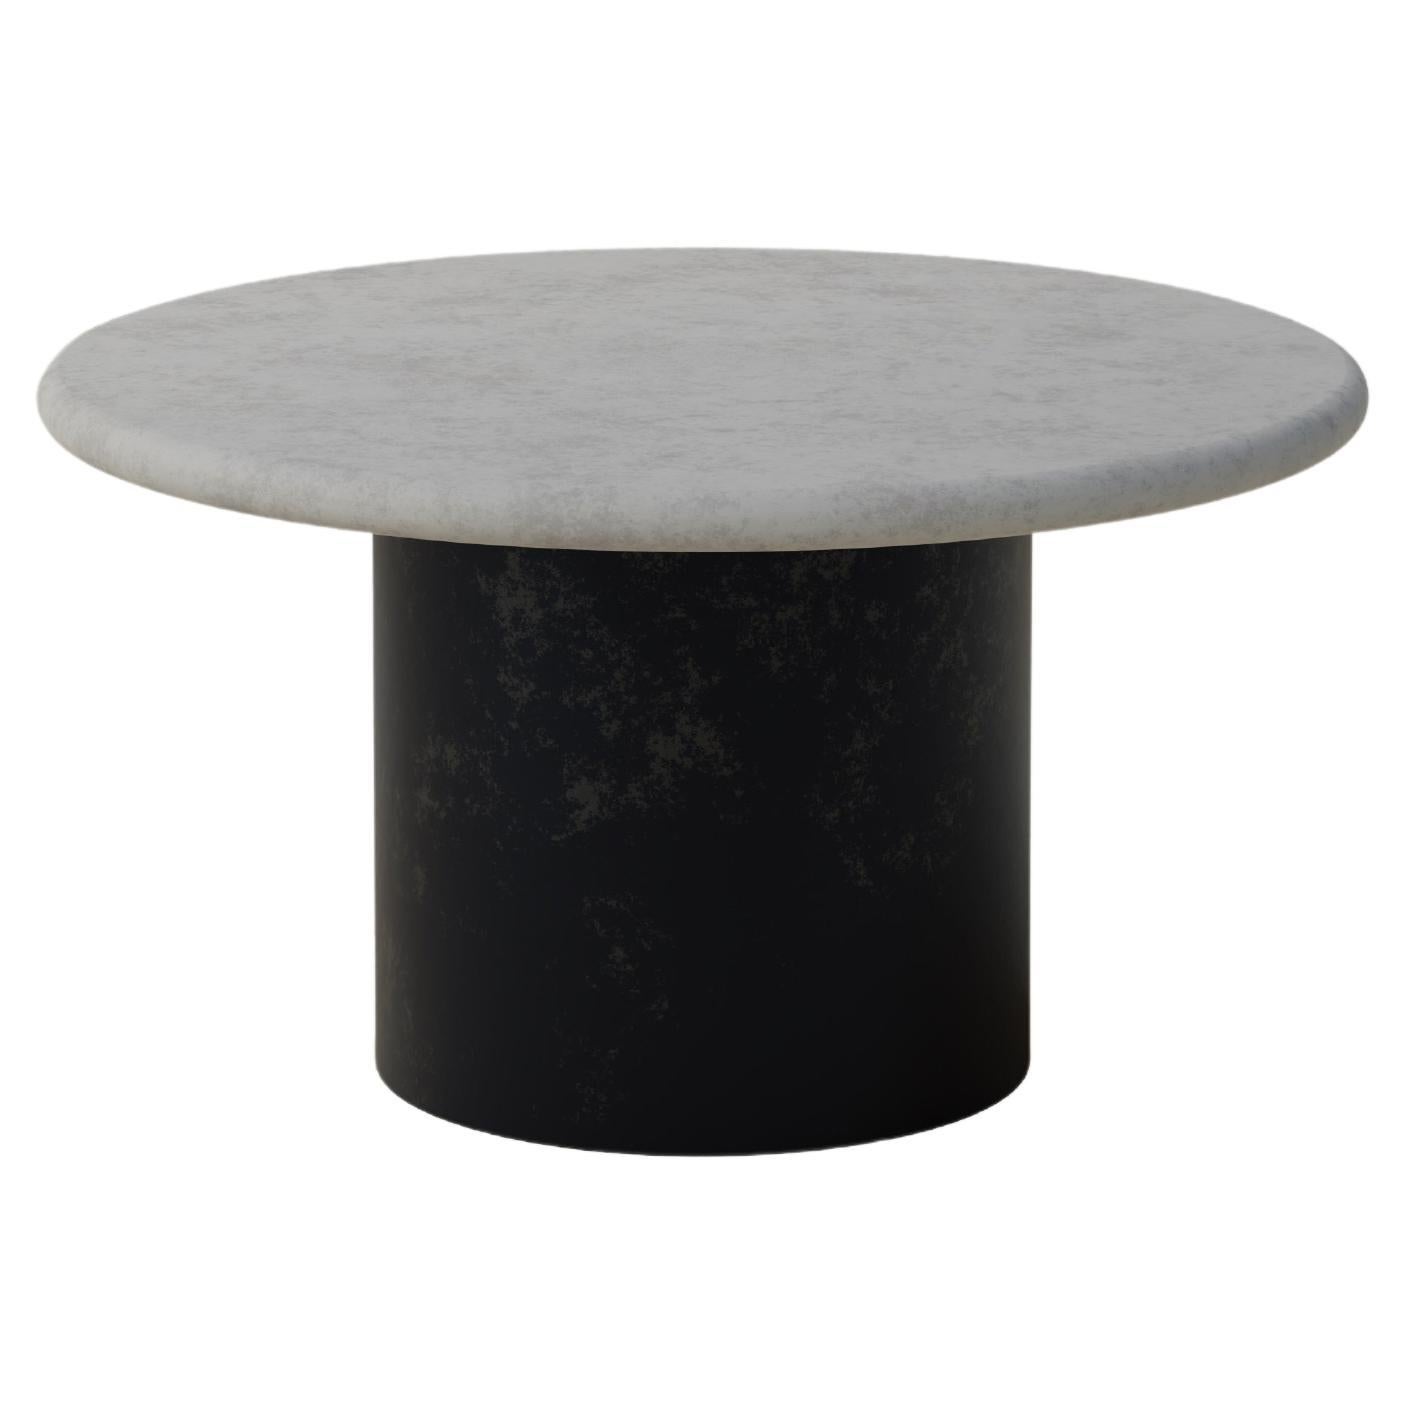 Raindrop Coffee Table, 600, Microcrete / Patinated For Sale